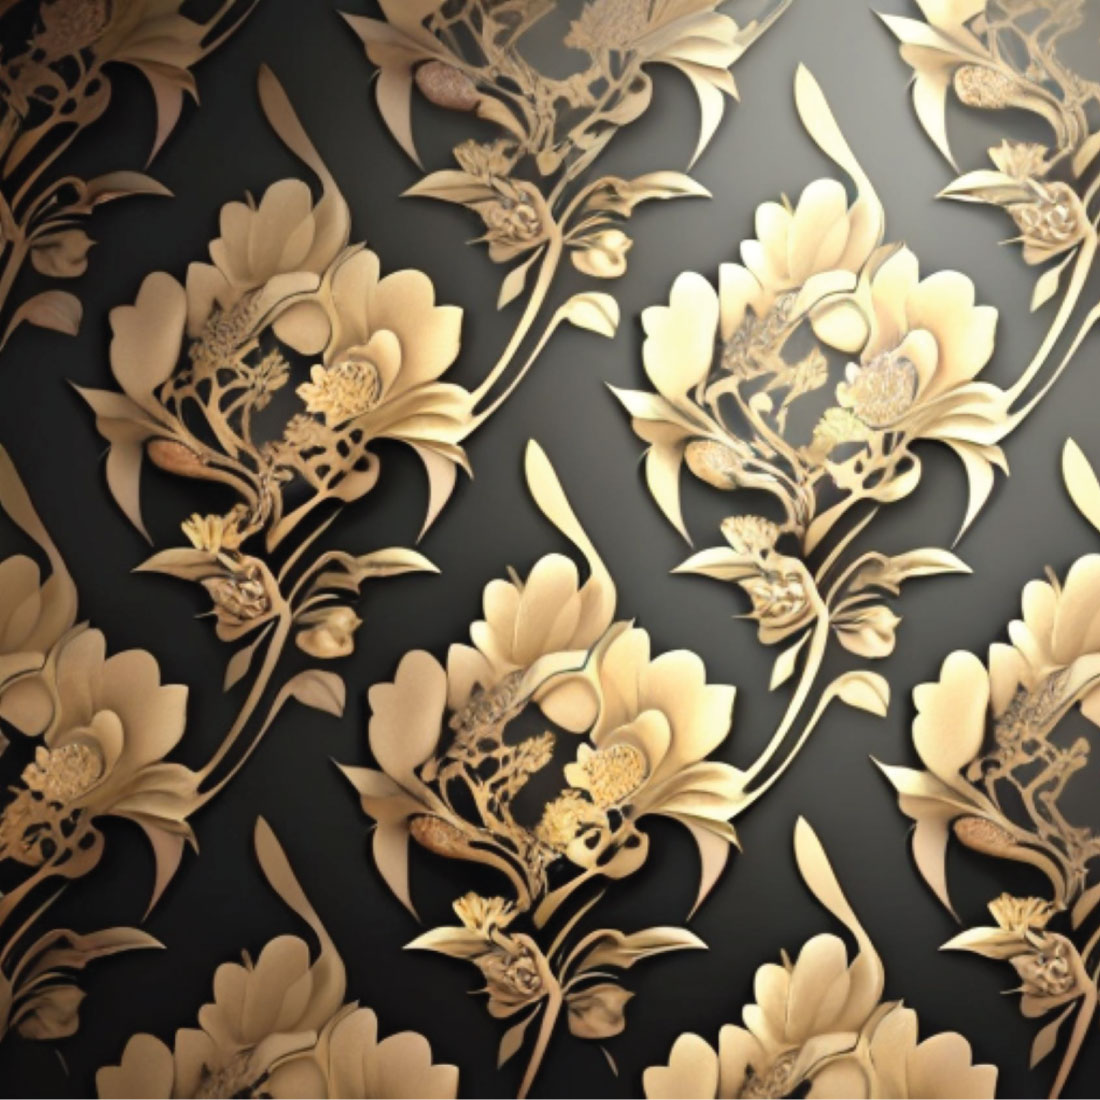 70+ Plus Luxury Black and Golden Background Wallpaper for 7$ only cover image.